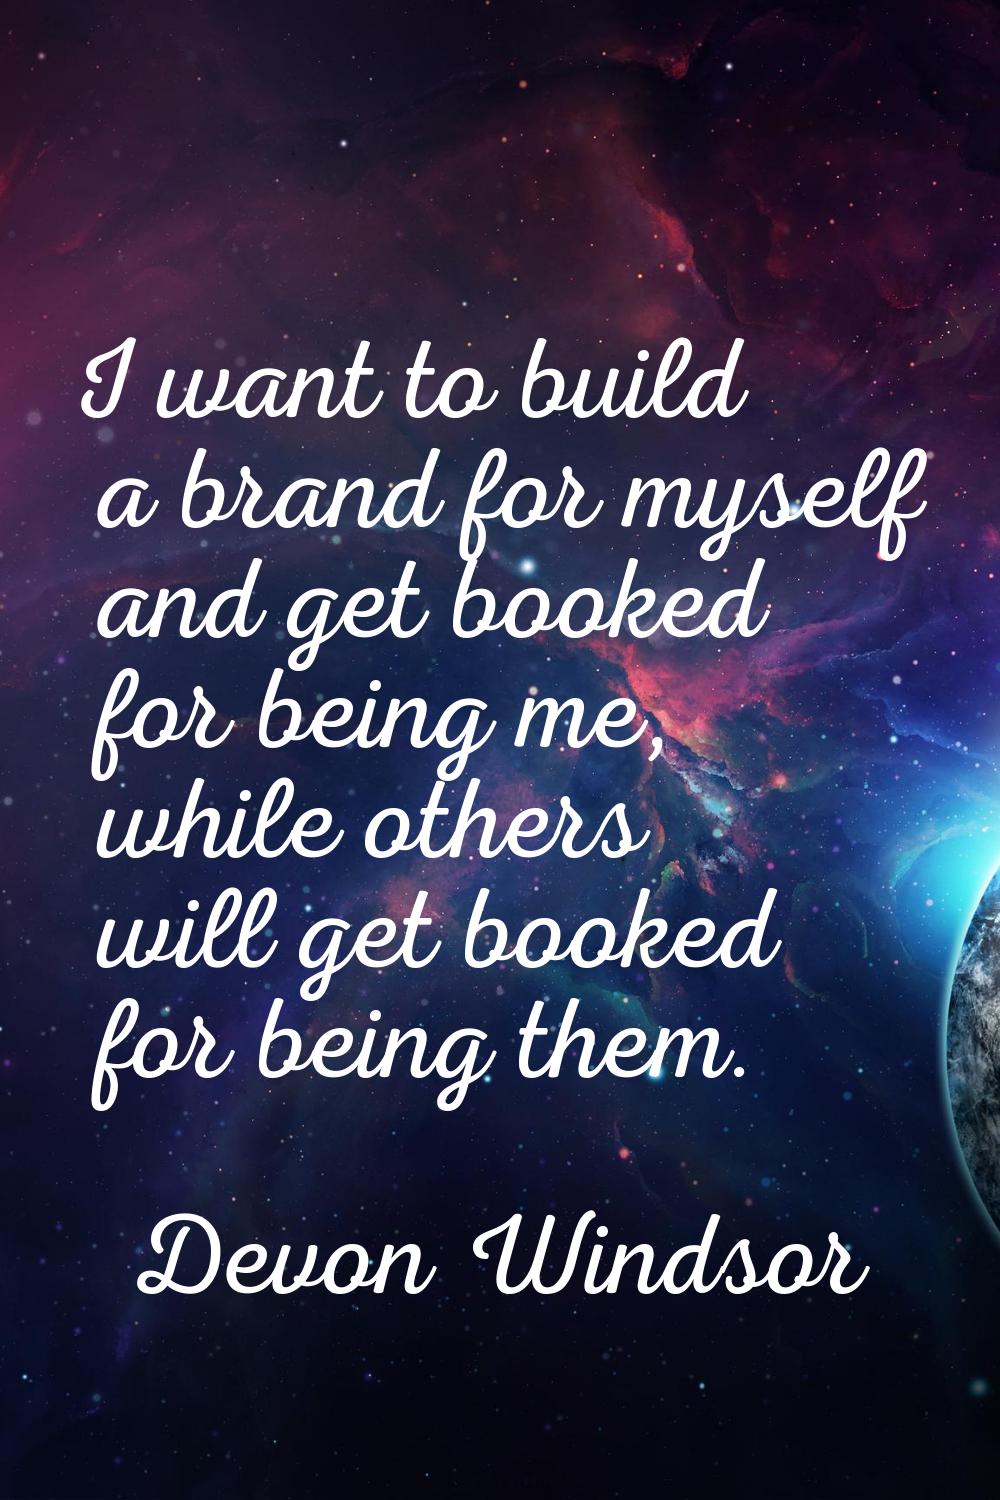 I want to build a brand for myself and get booked for being me, while others will get booked for be